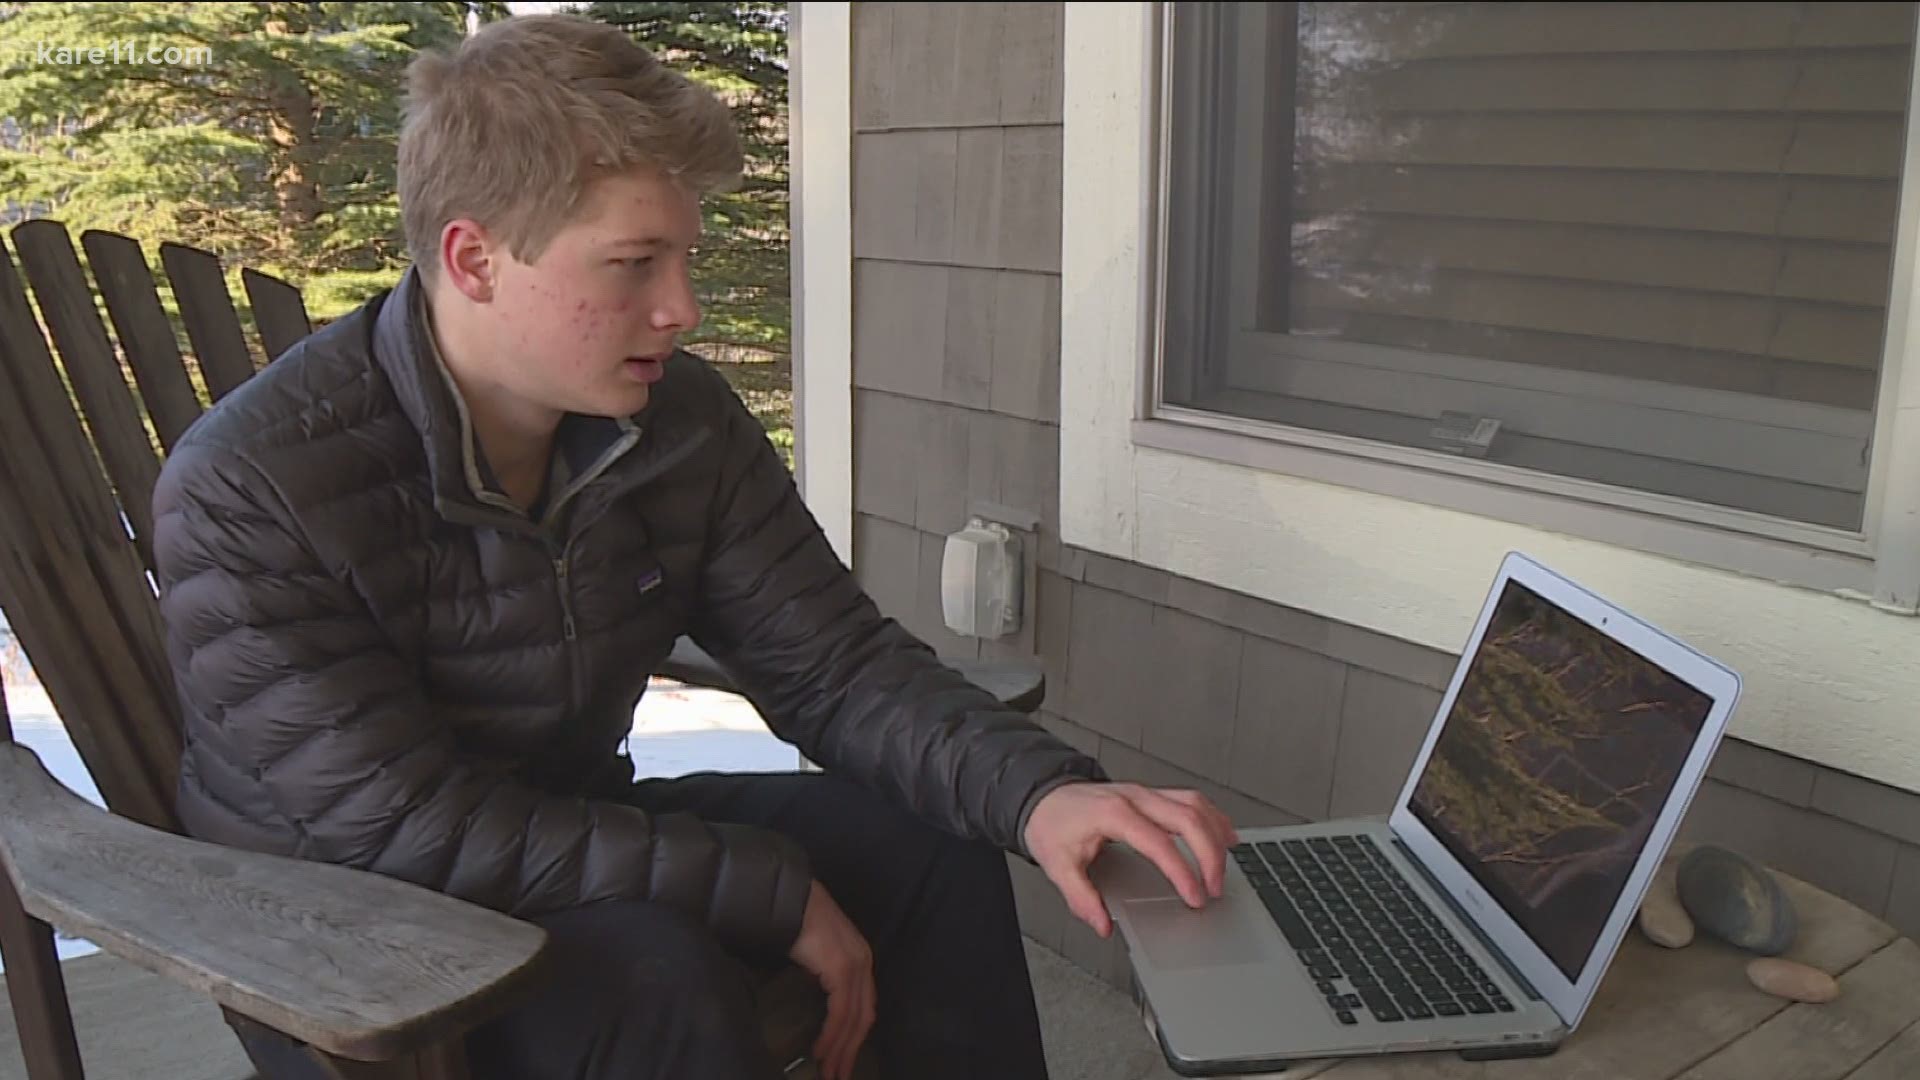 A tech savvy teen from Eden Prairie created a COVID-19 tracking app that's gotten congressional recognition.